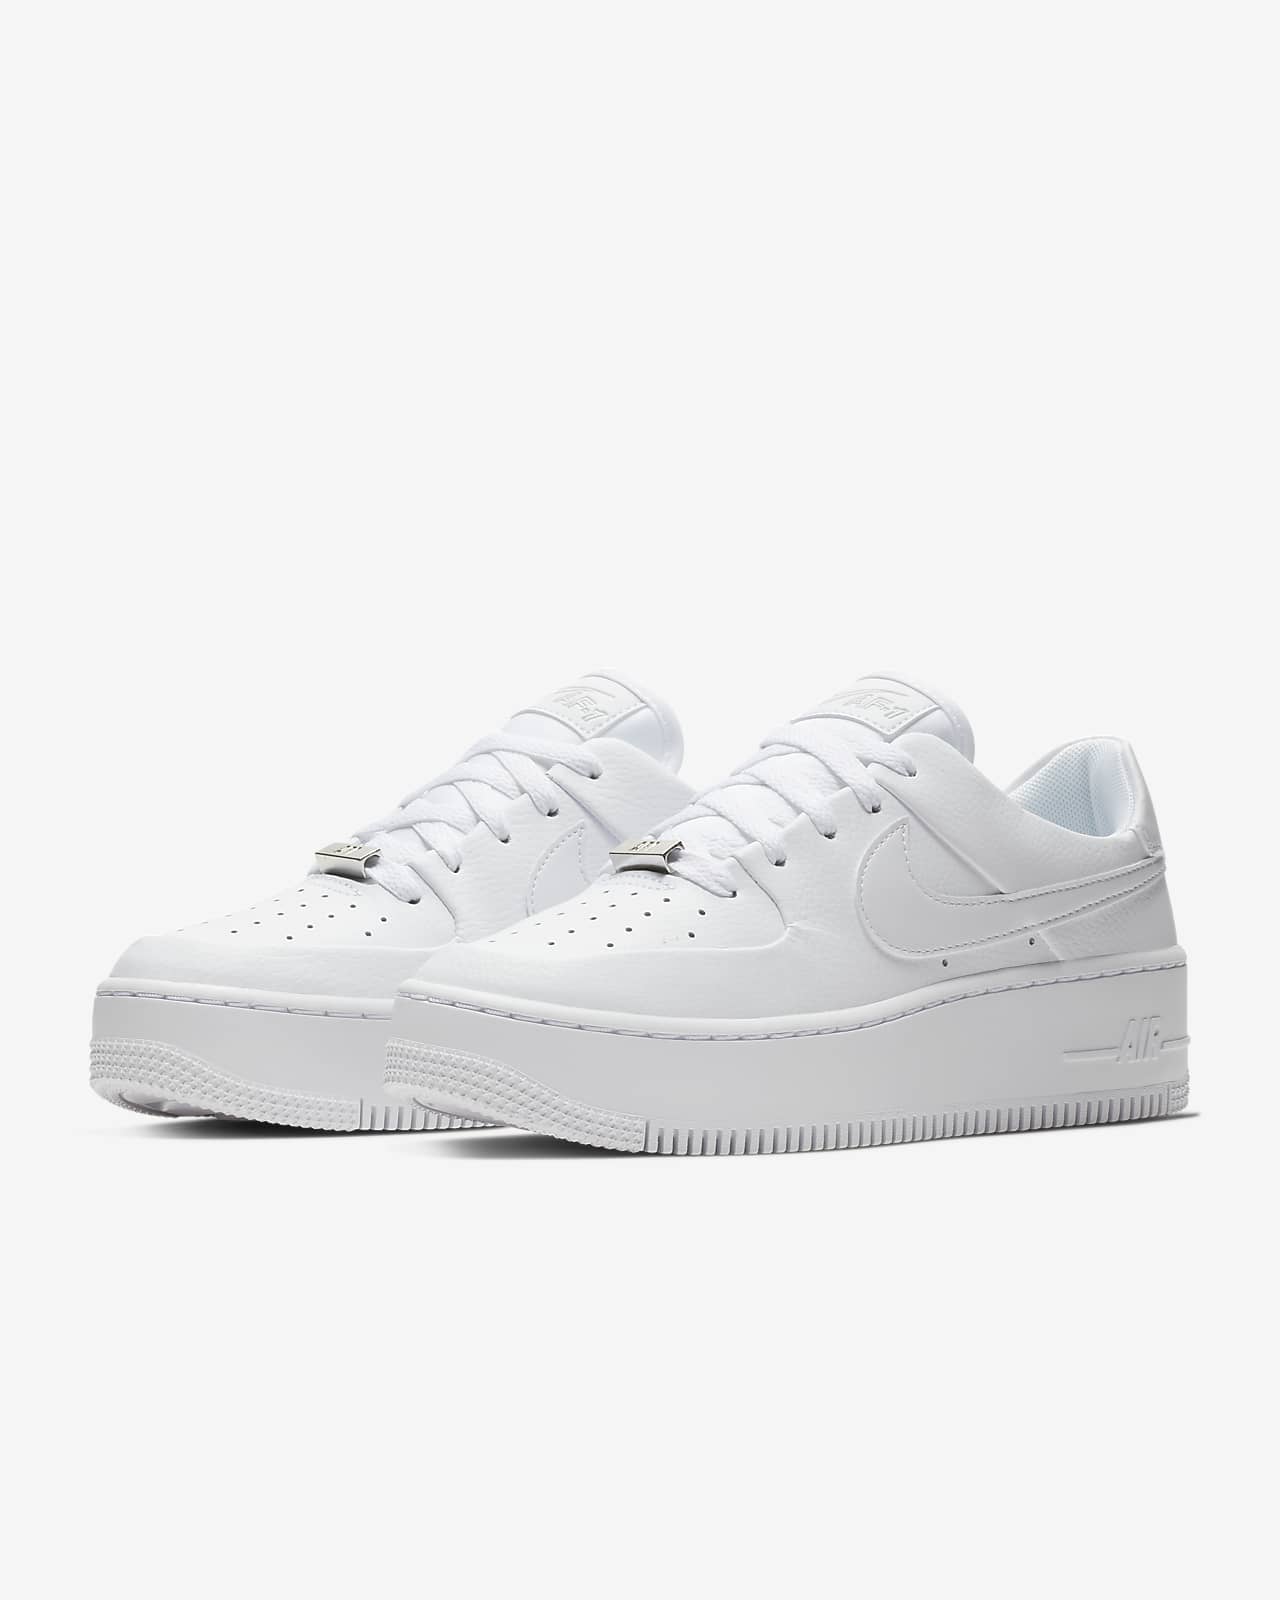 chaussure nike air force 1 femme pointure 39